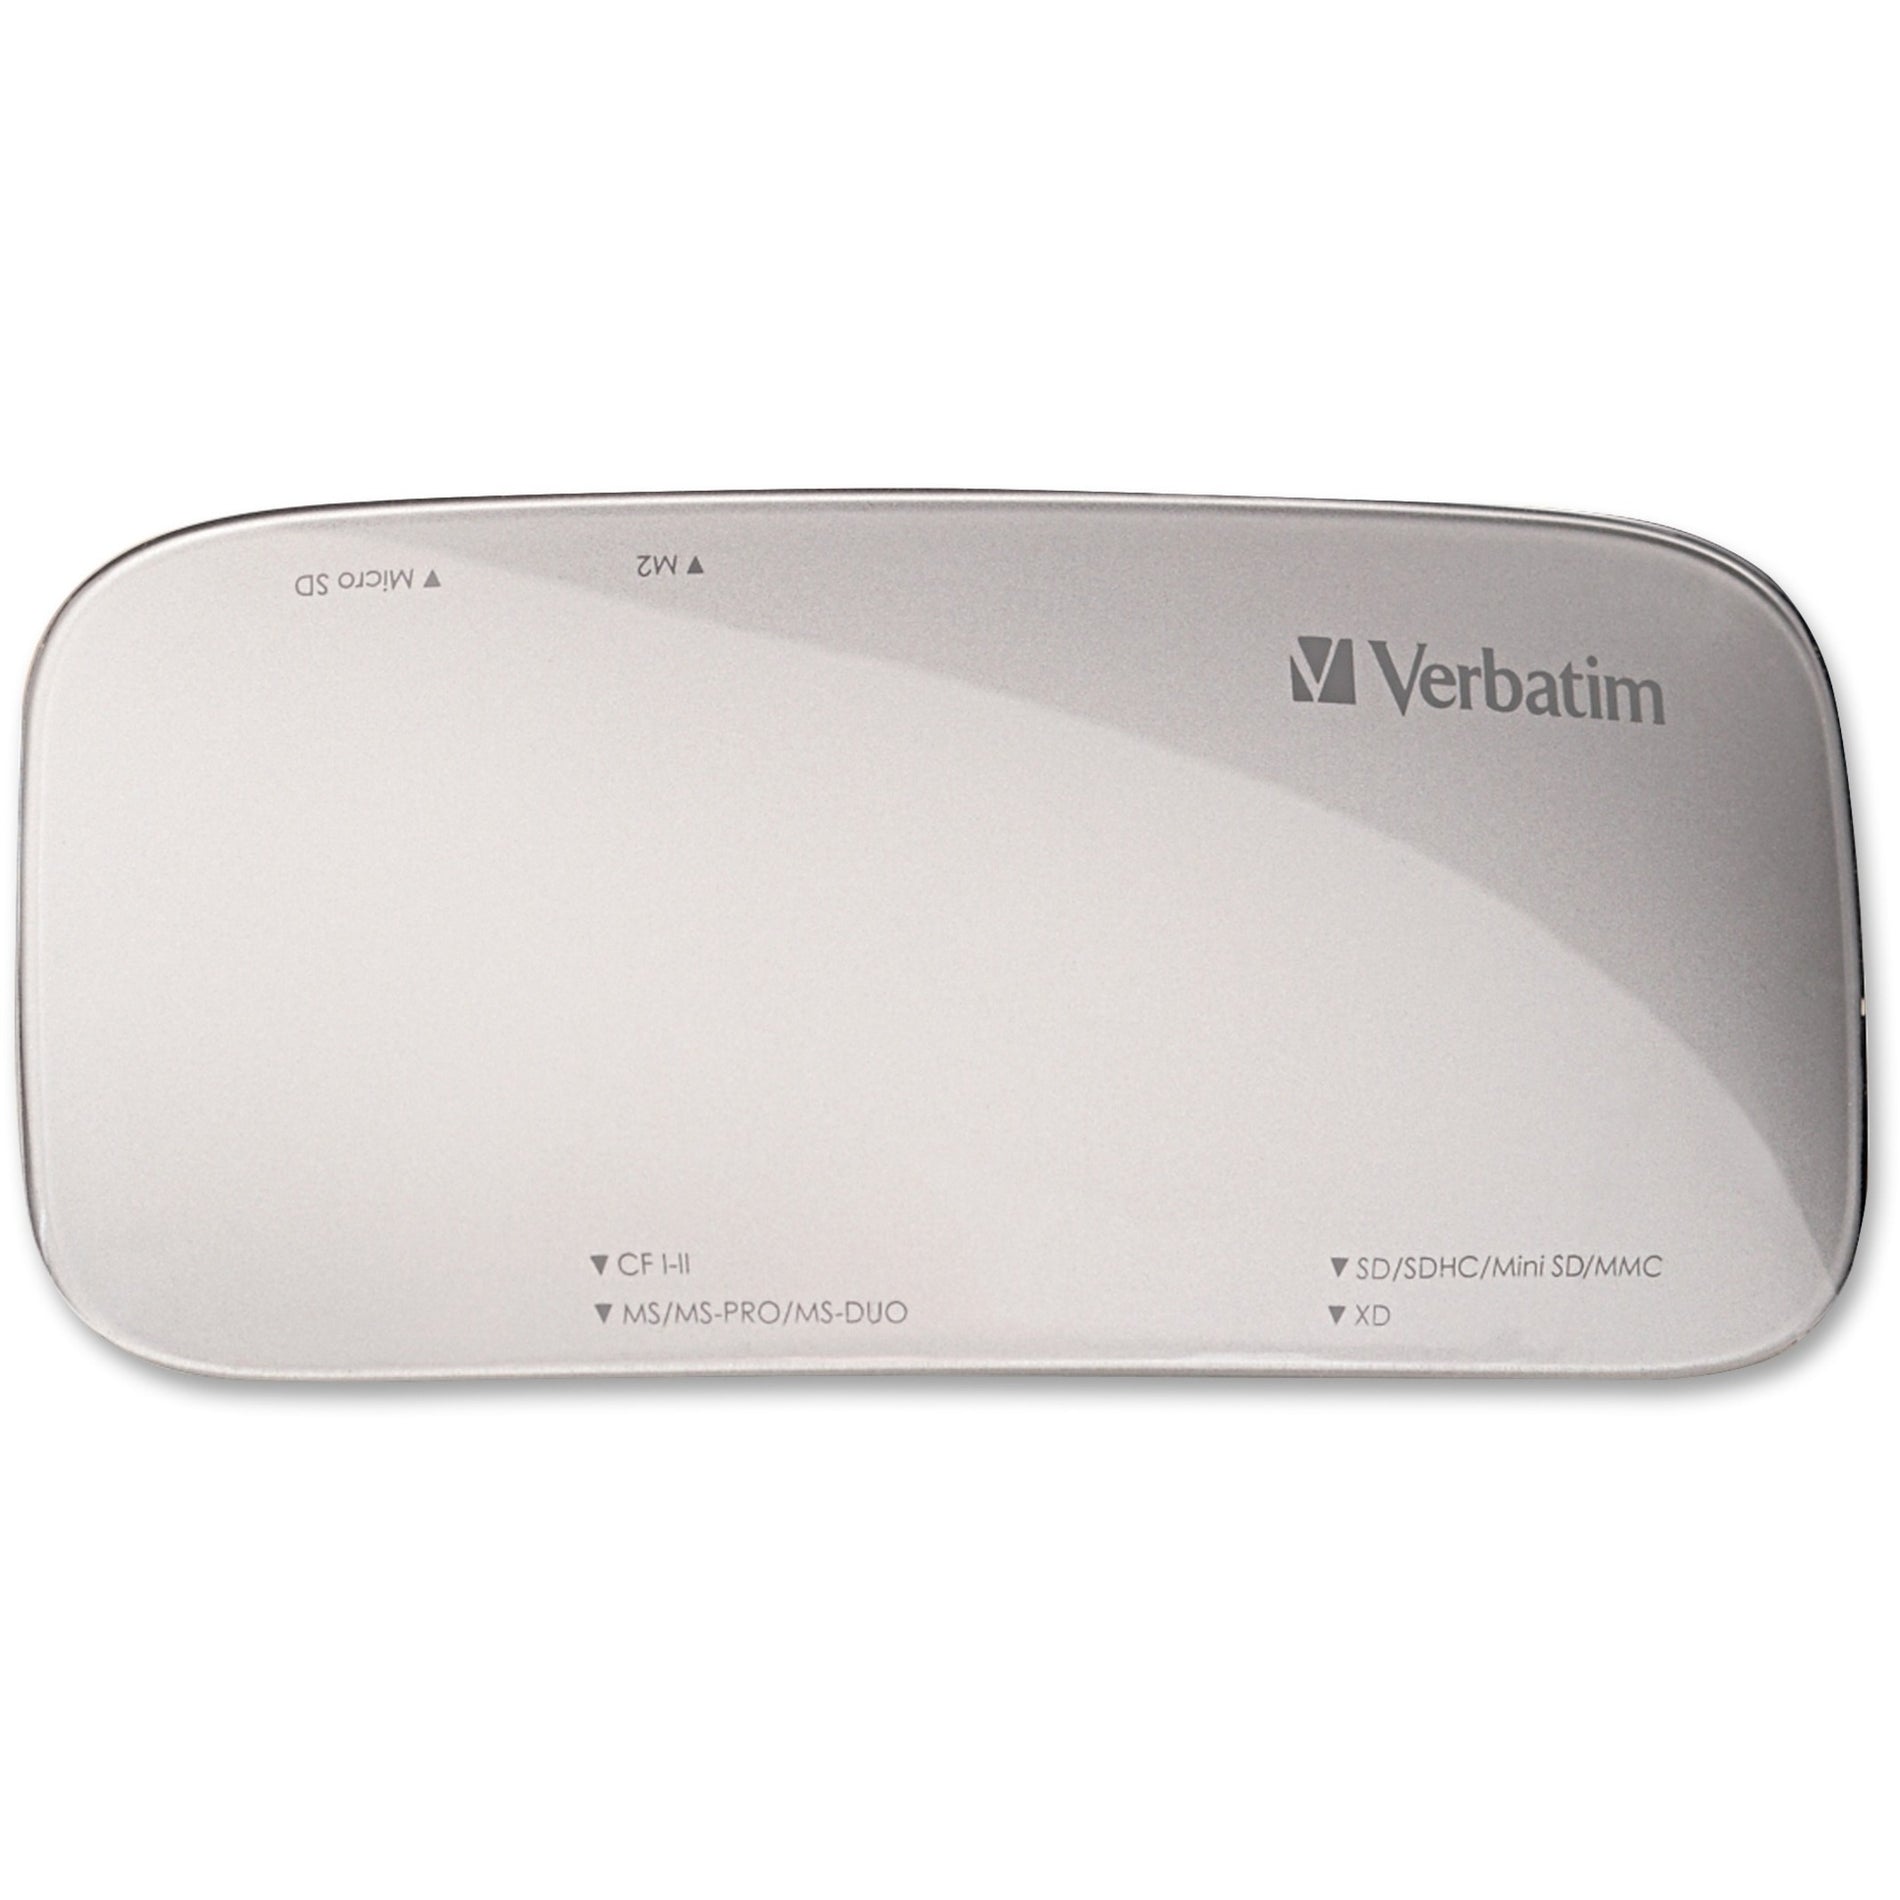 Verbatim 97706 USB 3.0 Universal Card Reader, Silver - High-Speed Data Transfer and Easy File Management